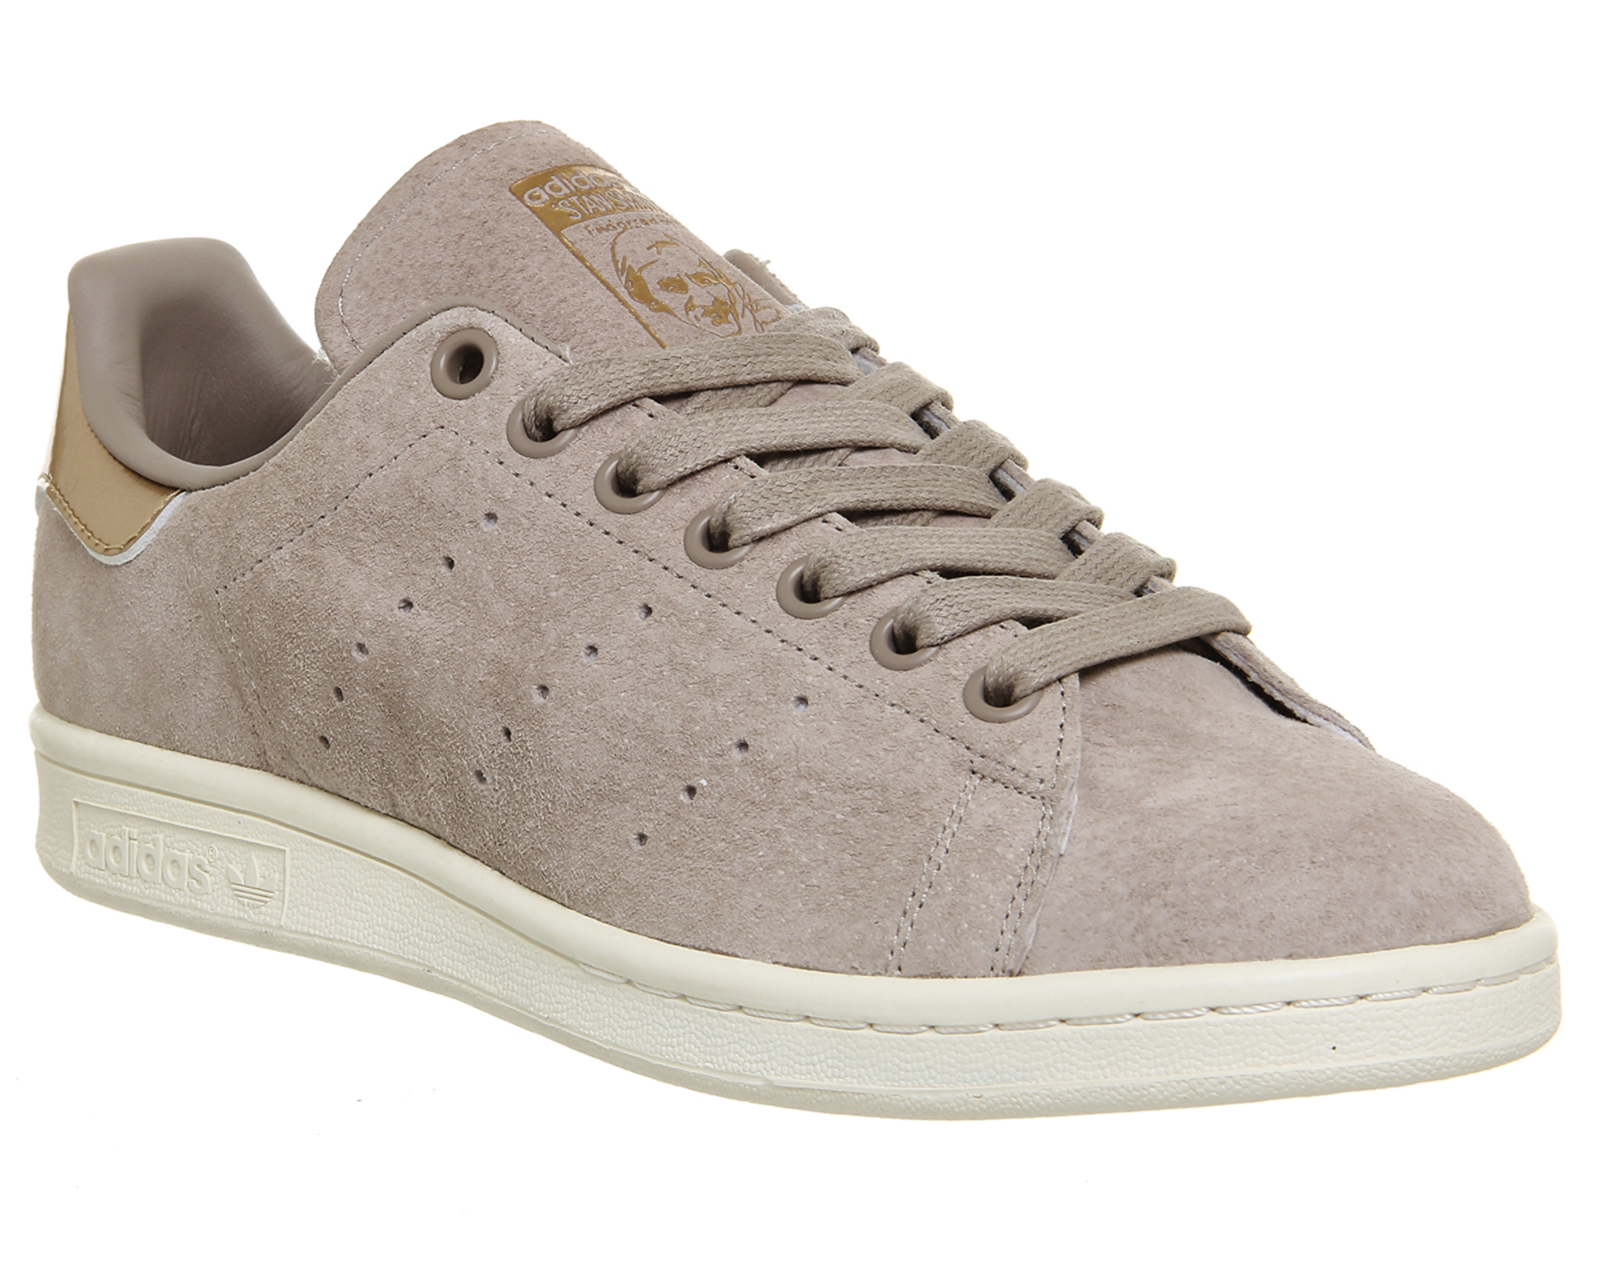 adidas Stan Smith Vapour Grey Copper Exclusive - Hers trainers